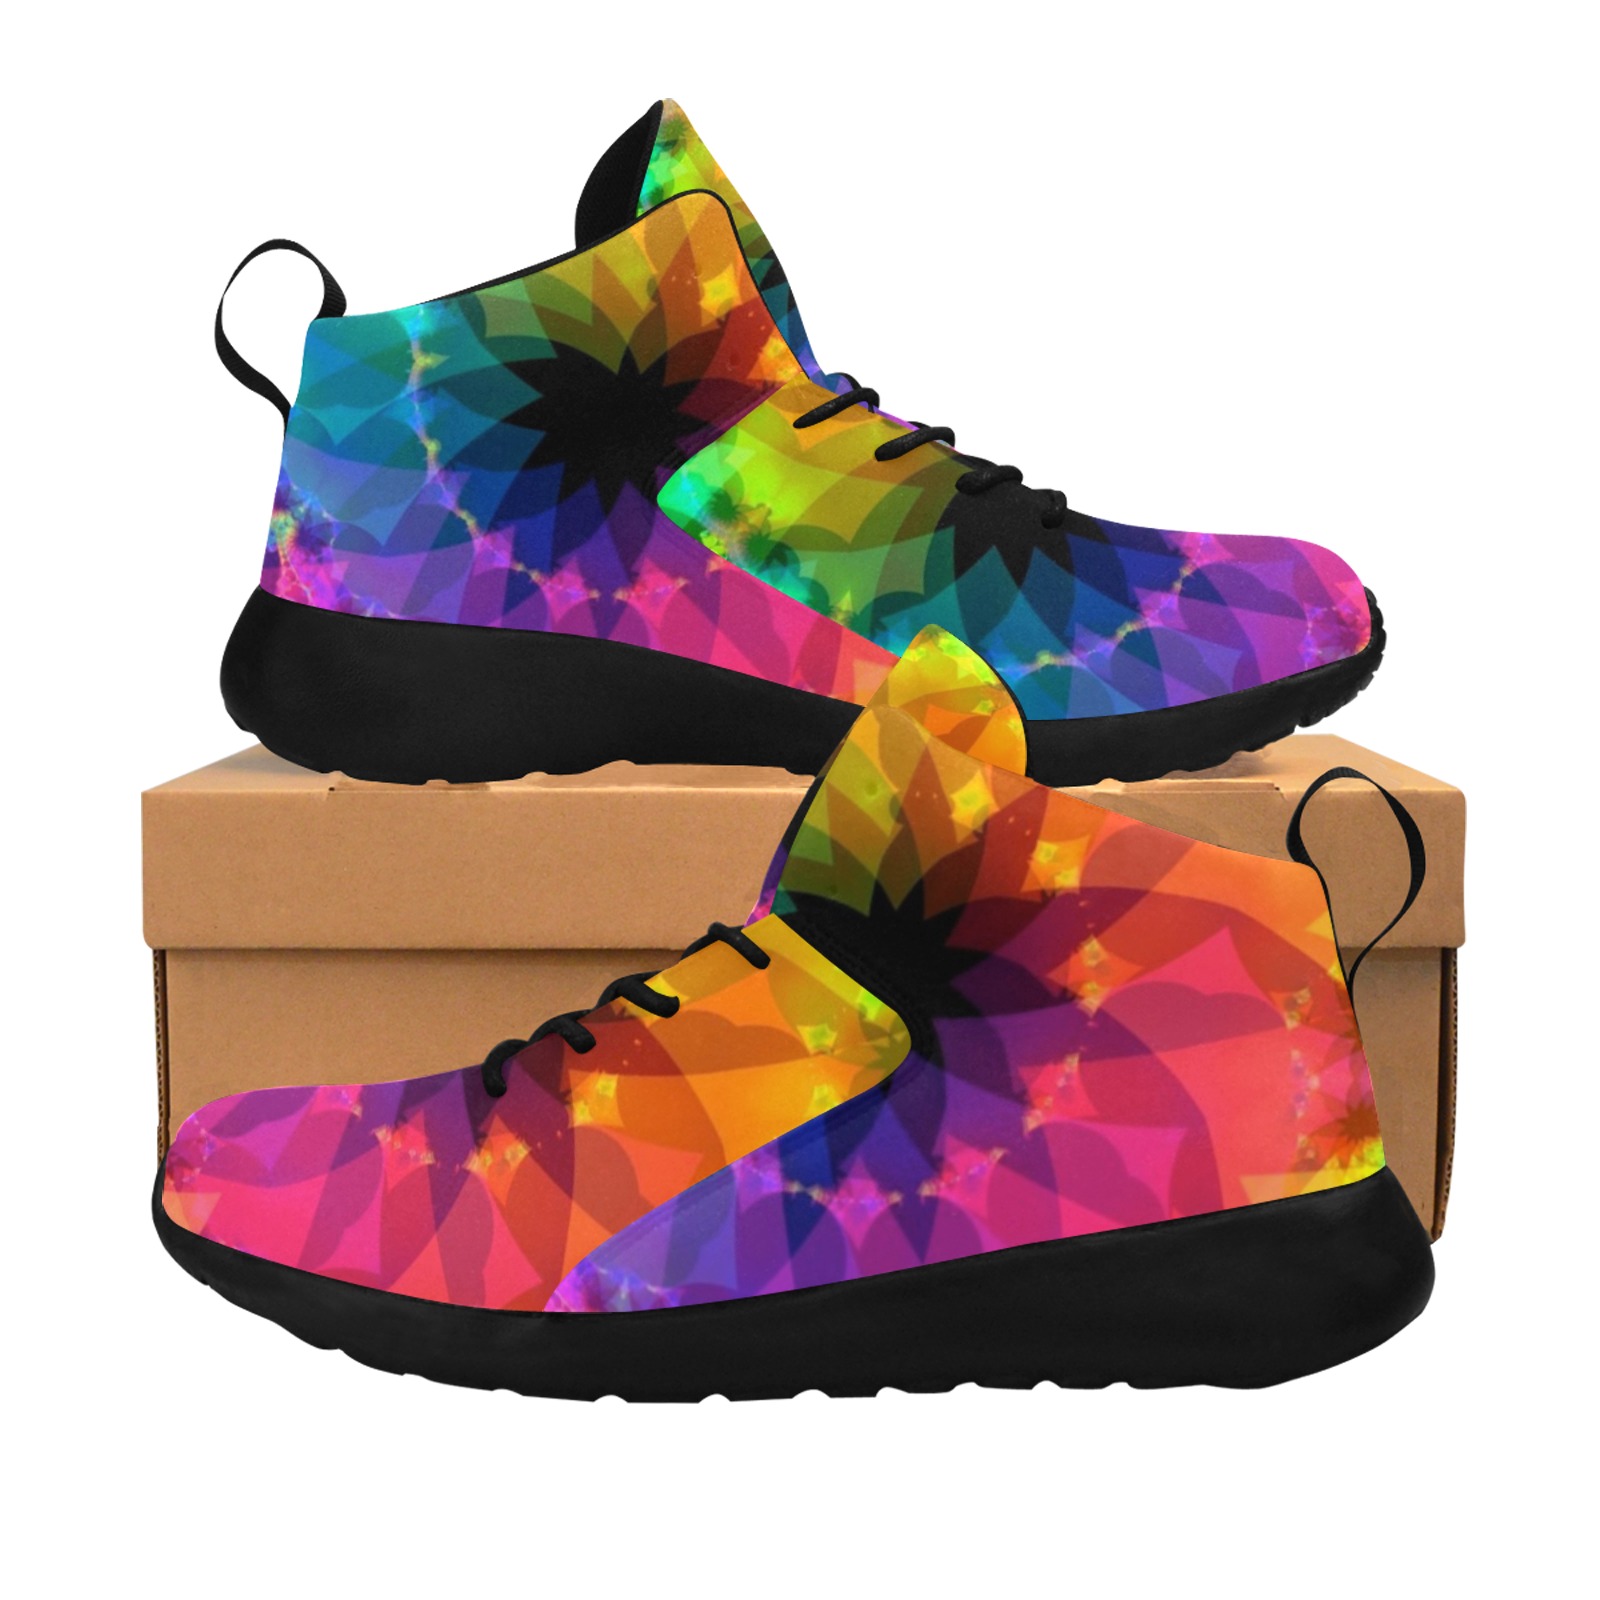 Colorful Spiral Fractal Women's Chukka Training Shoes (Model 57502)